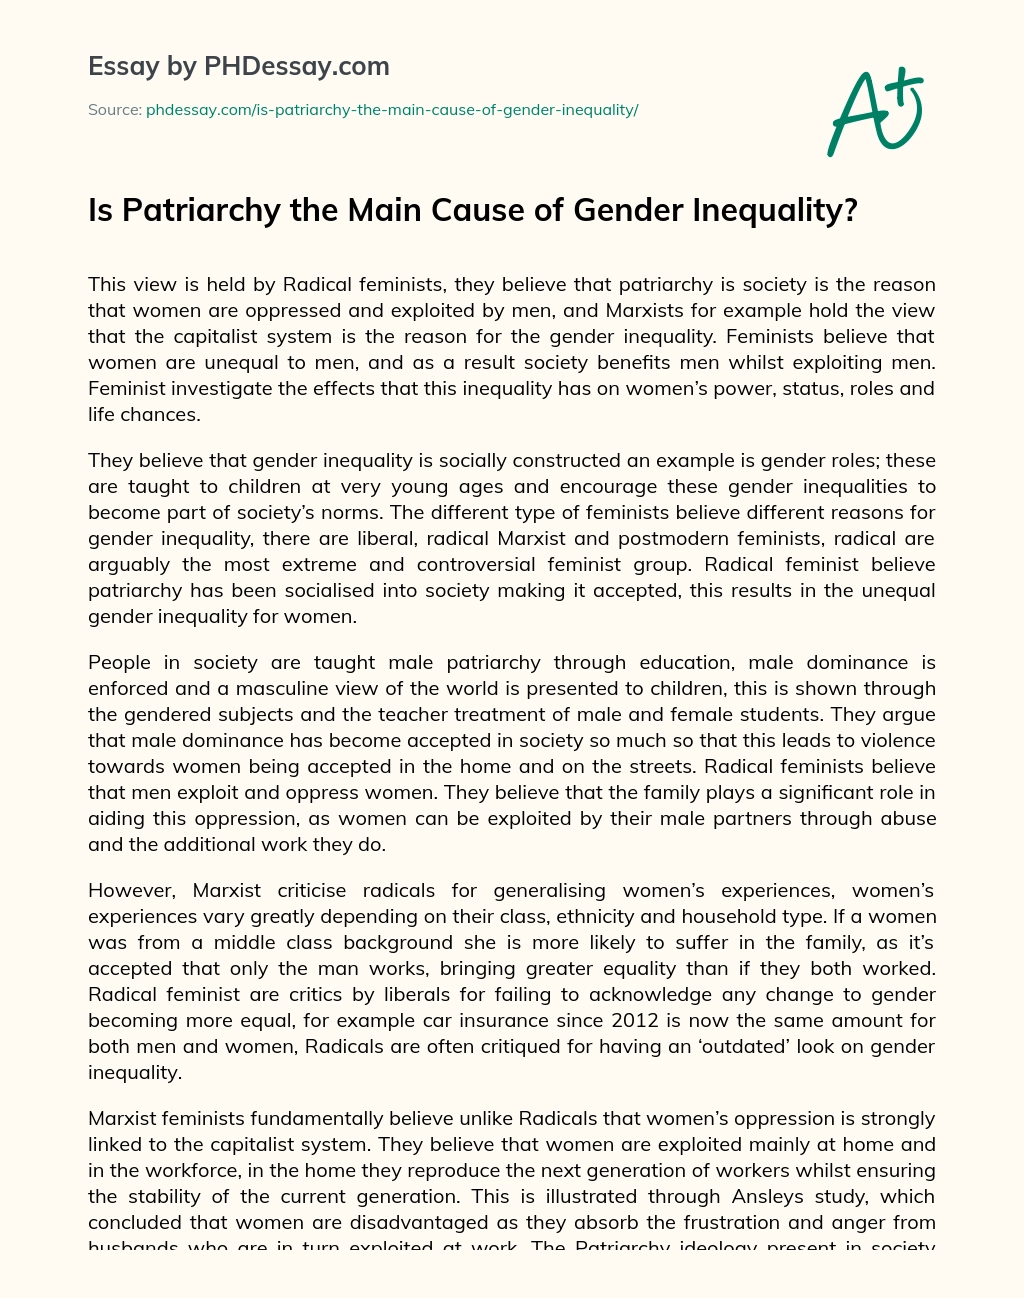 Is Patriarchy the Main Cause of Gender Inequality? essay